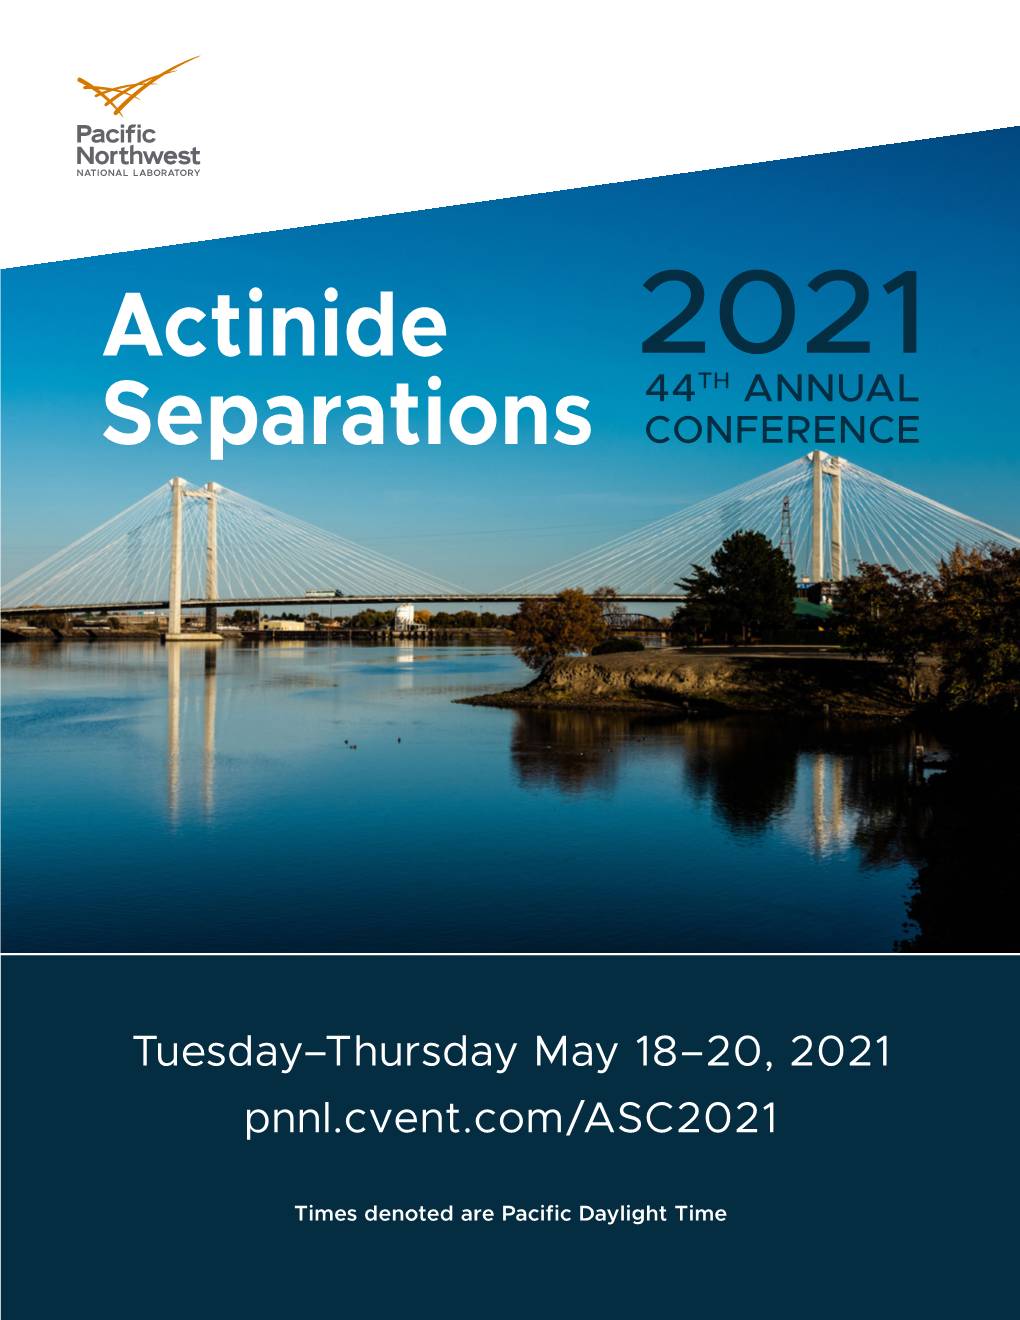 Actinide Separations Conference Program, May 2021